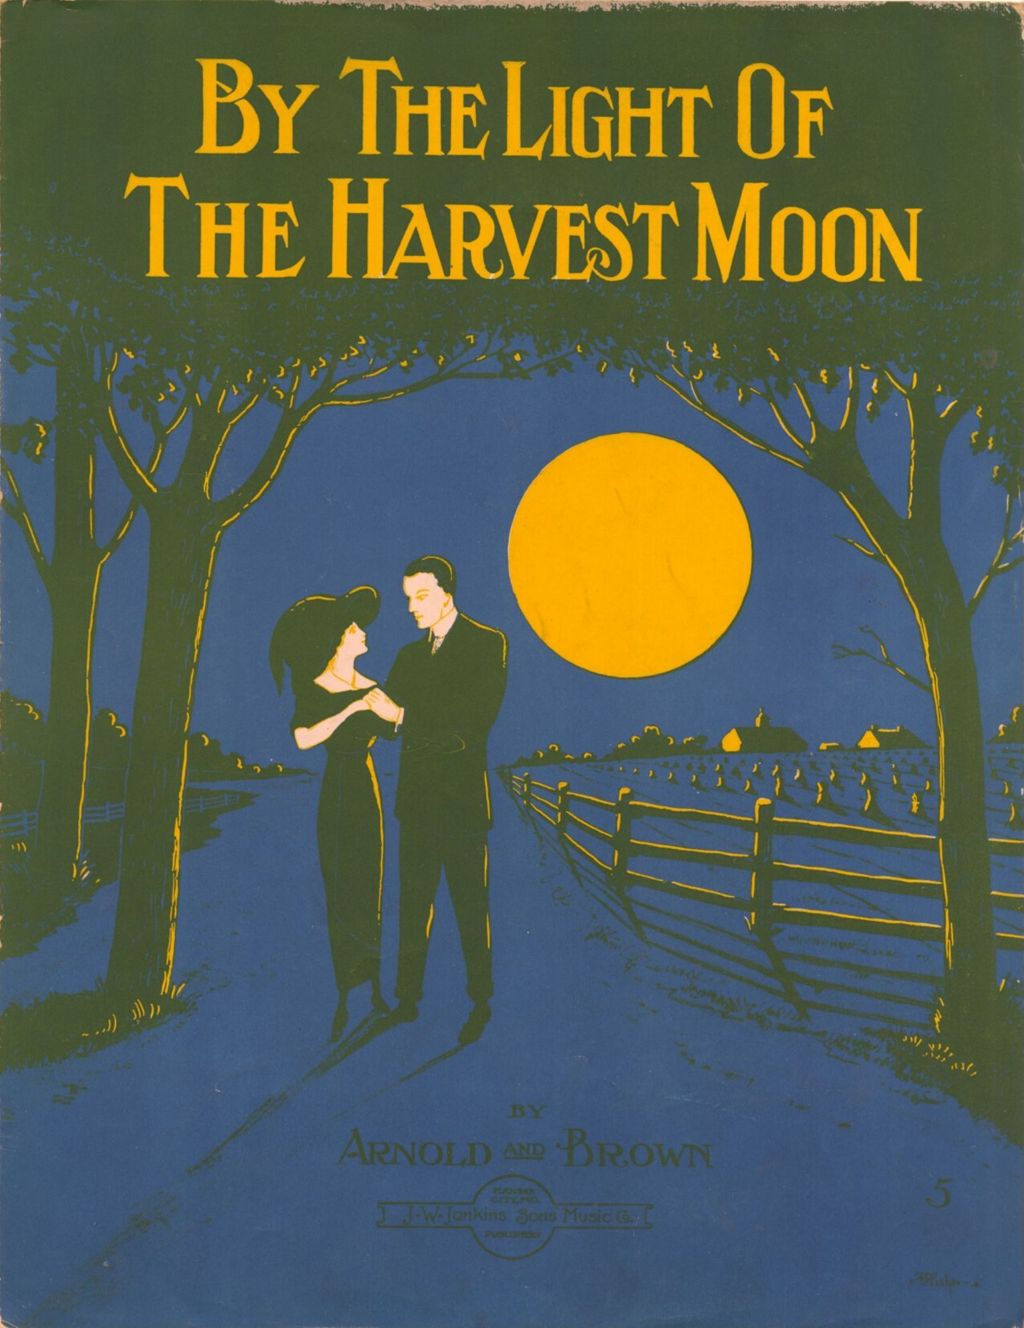 By The Light of The Harvest Moon